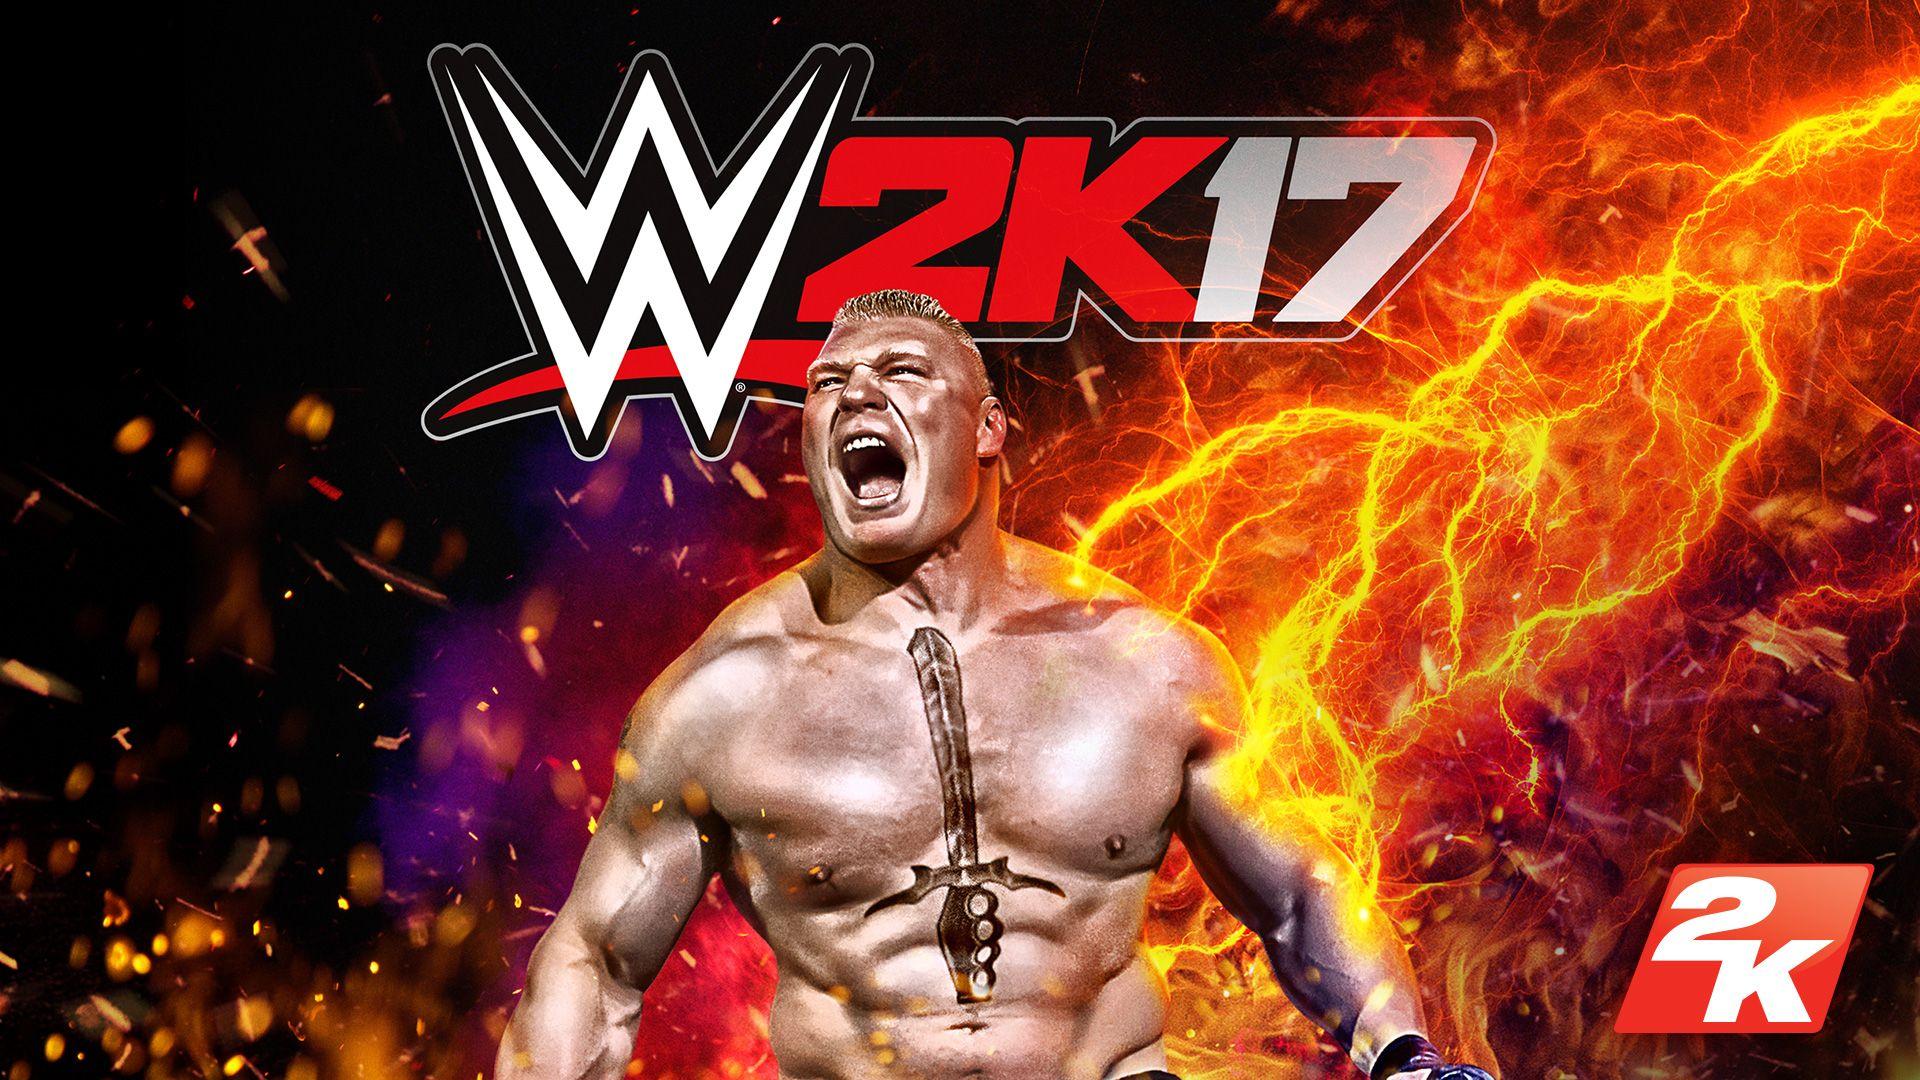 WWE 2K17 DLC and Season Pass details announced. Wwe game, Wwe 2k17 ps Xbox